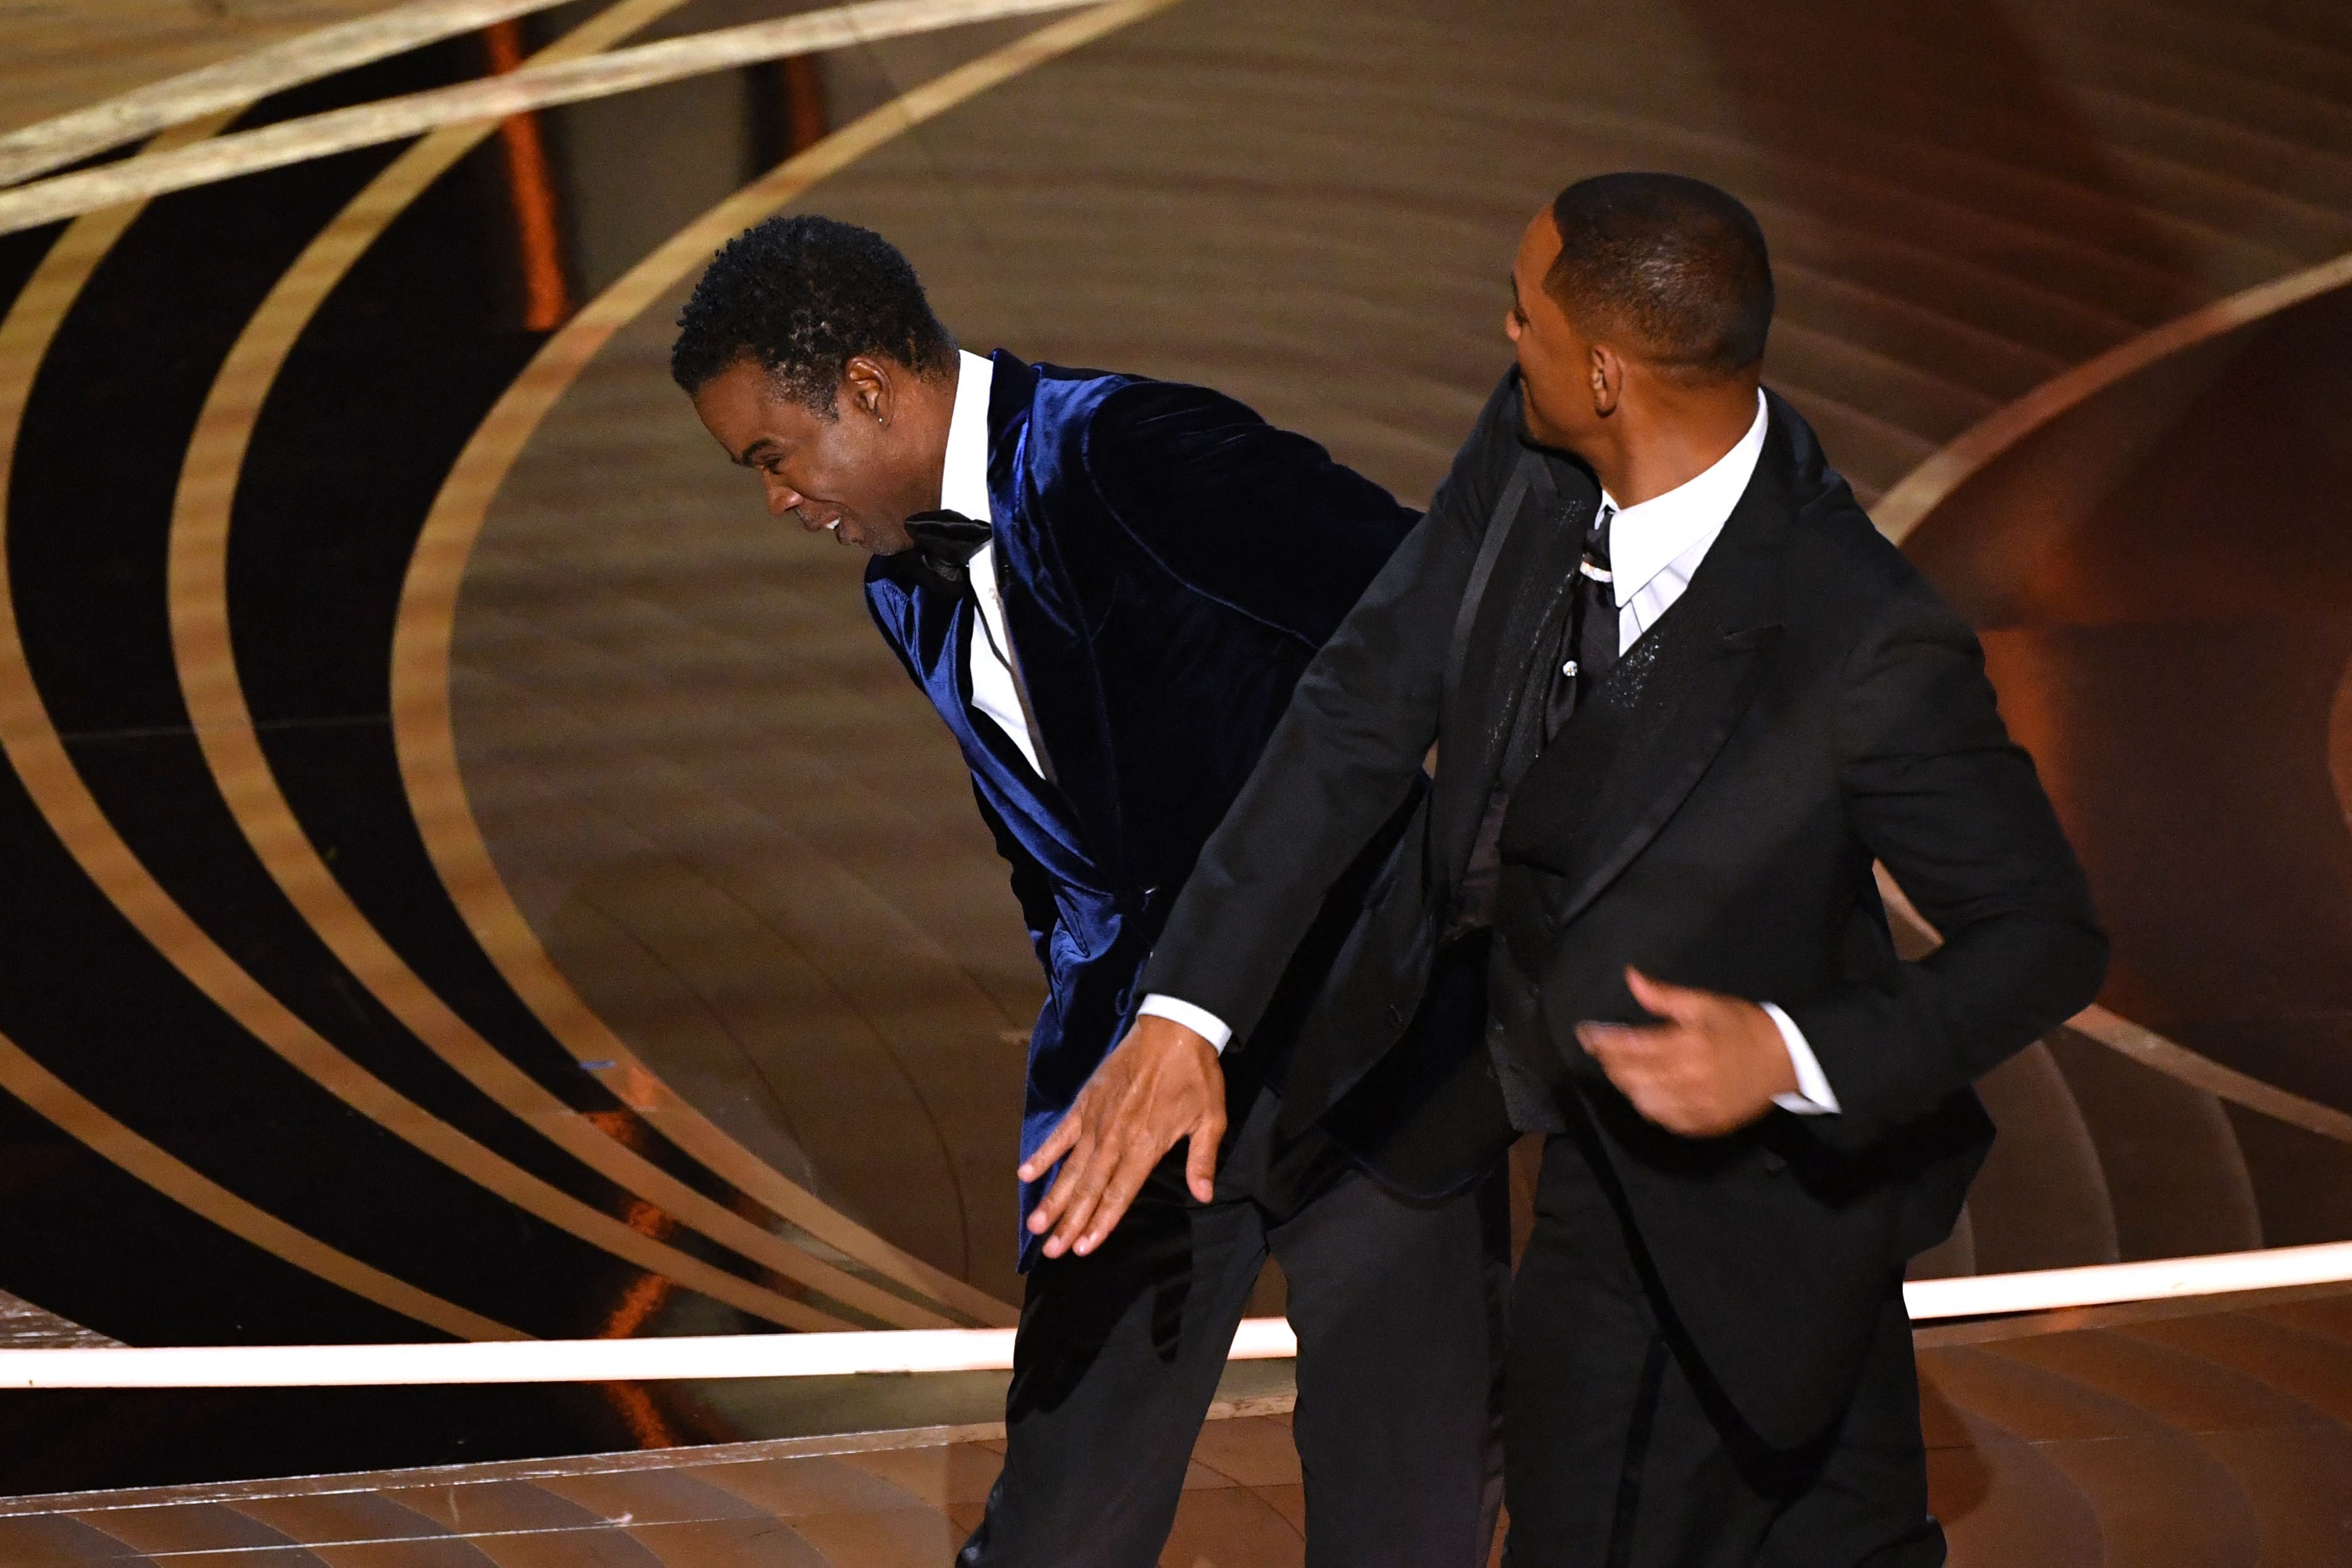 Will Smith slapping Chris Rock in public was always going to be a major story